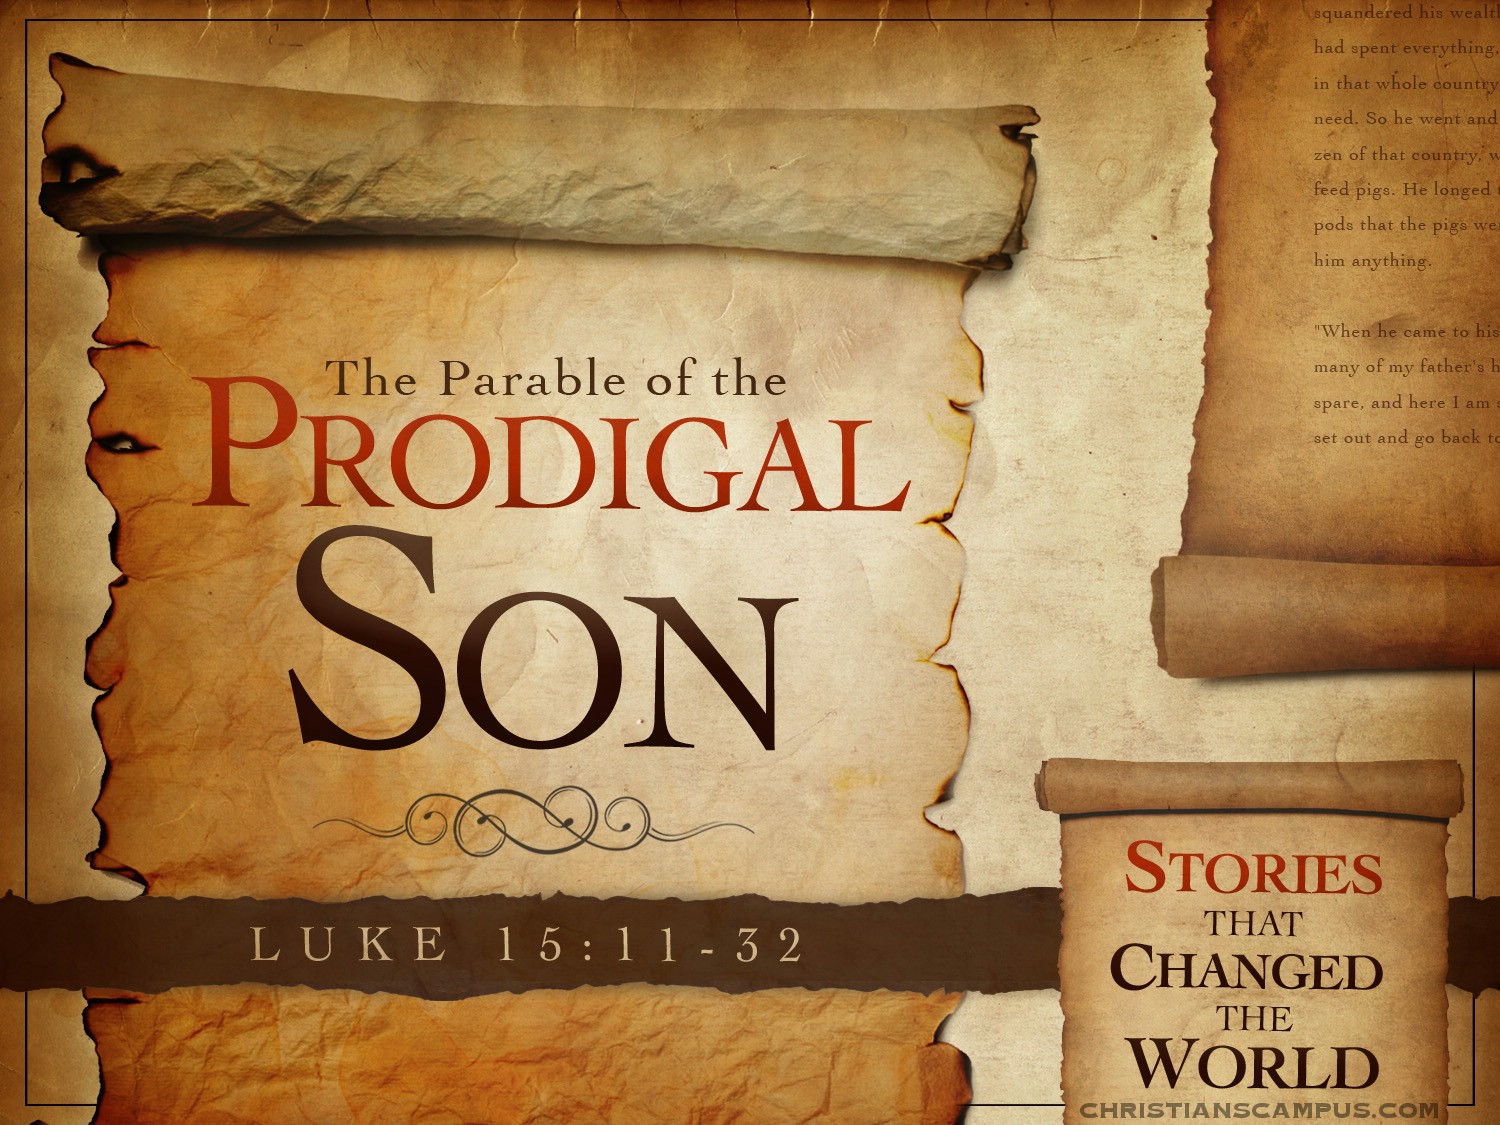 The Parable Son